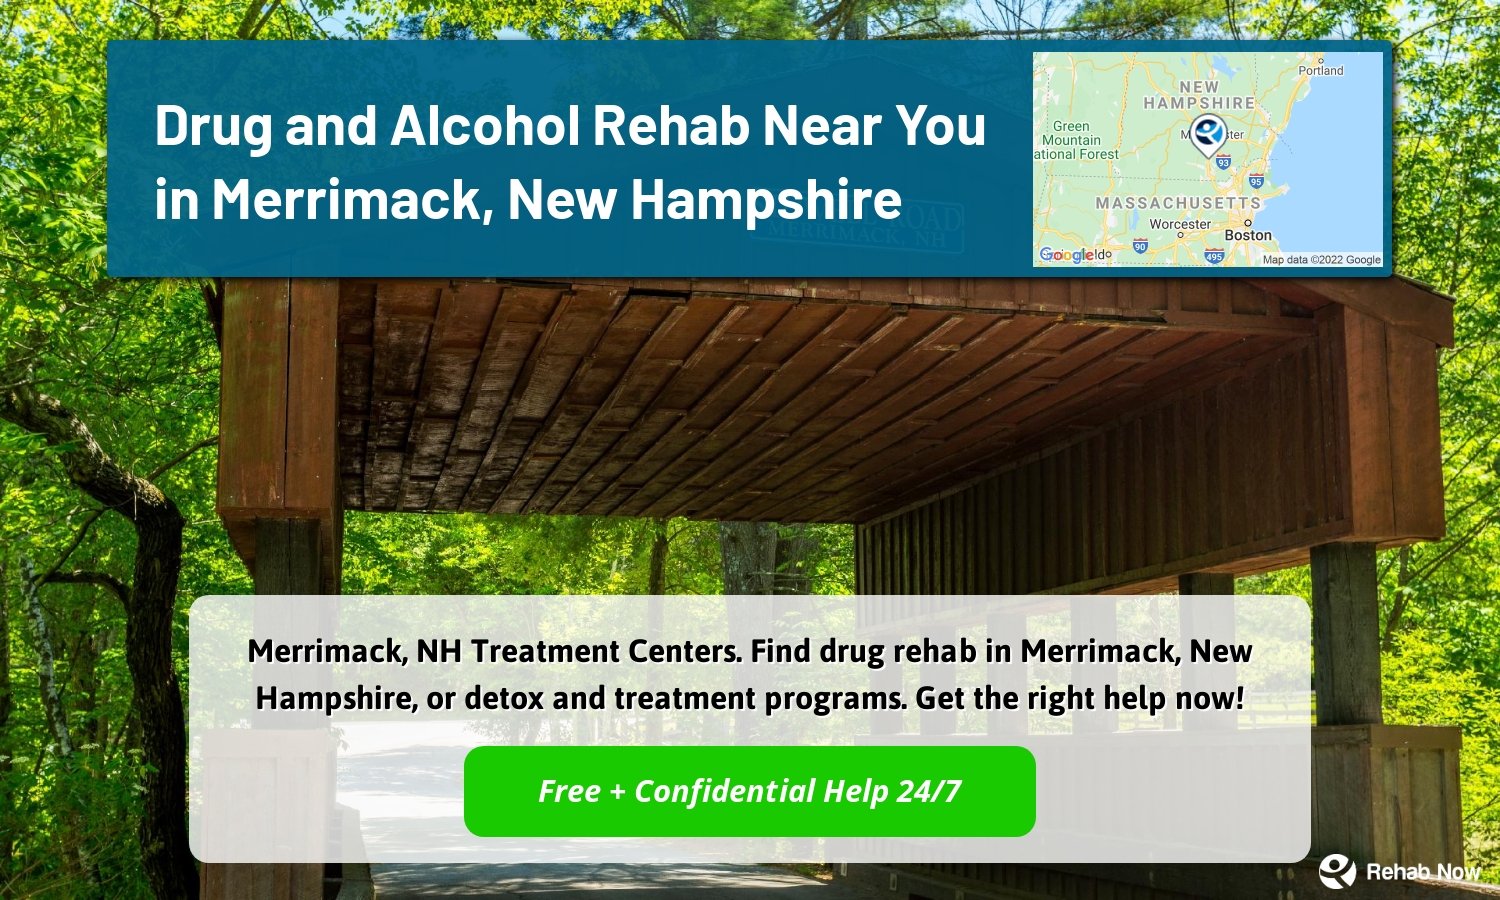 Merrimack, NH Treatment Centers. Find drug rehab in Merrimack, New Hampshire, or detox and treatment programs. Get the right help now!